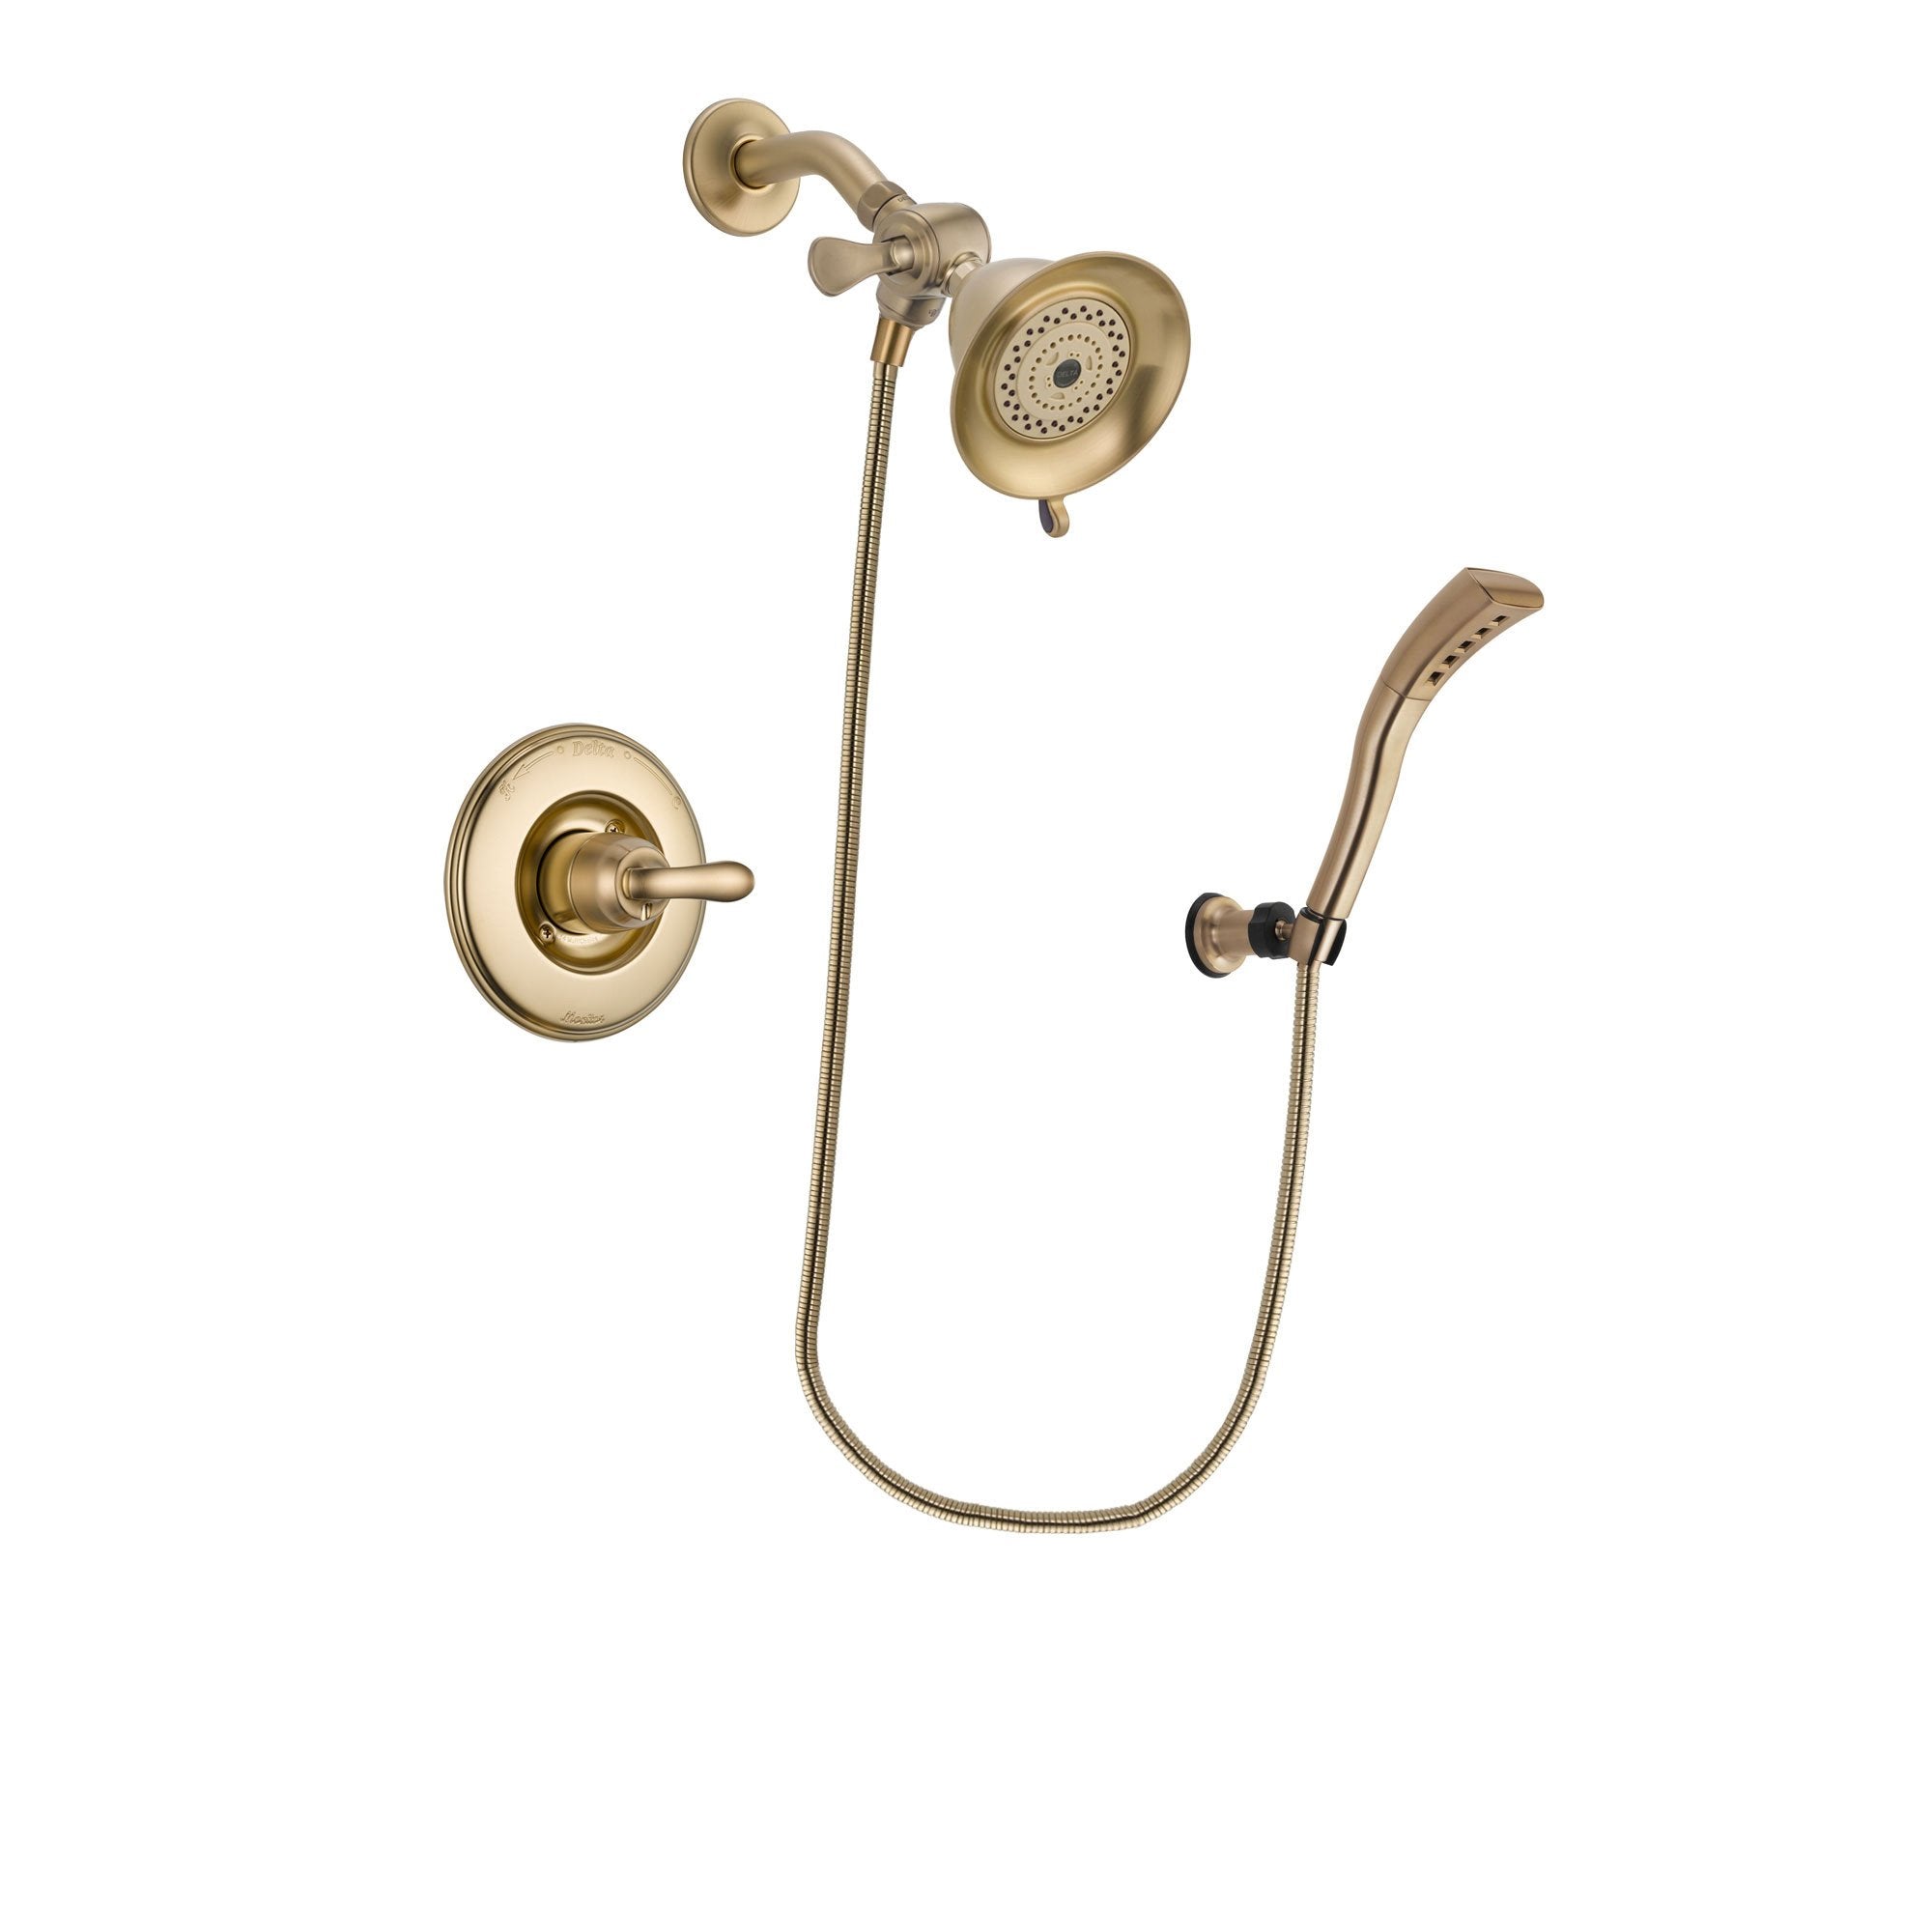 Delta Linden Champagne Bronze Finish Shower Faucet System Package with Water-Efficient Shower Head and Modern Wall Mount Personal Handheld Shower Spray Includes Rough-in Valve DSP3644V